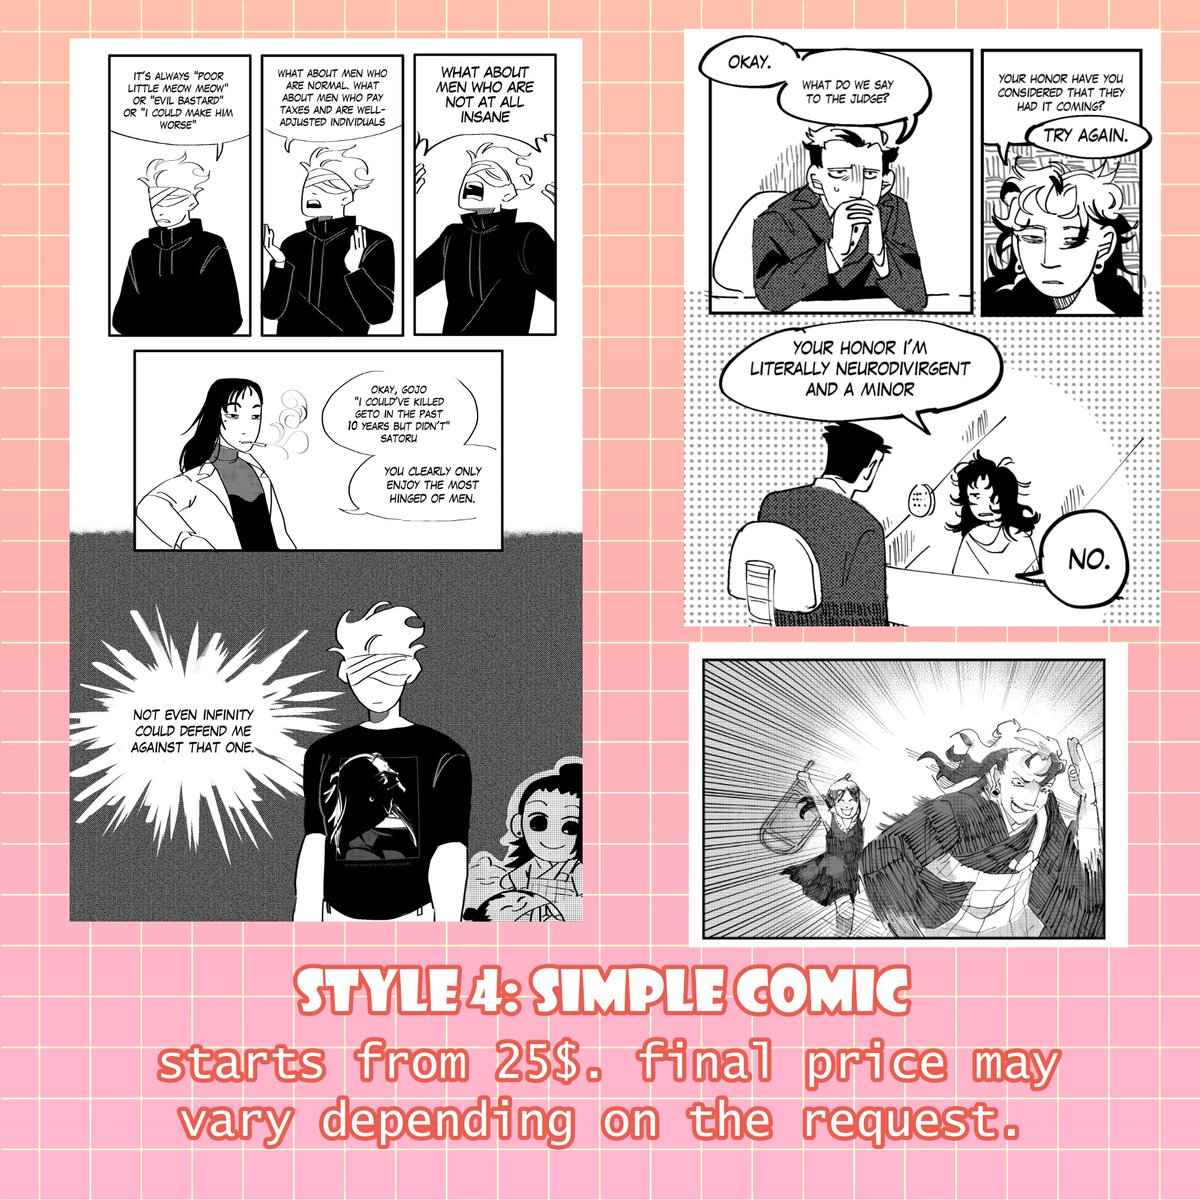 updated my commission samples, and added simple comics as a category available for request :-)

you can look for the TOS and more examples in the replies, and as usual, DM me if you're interested! 